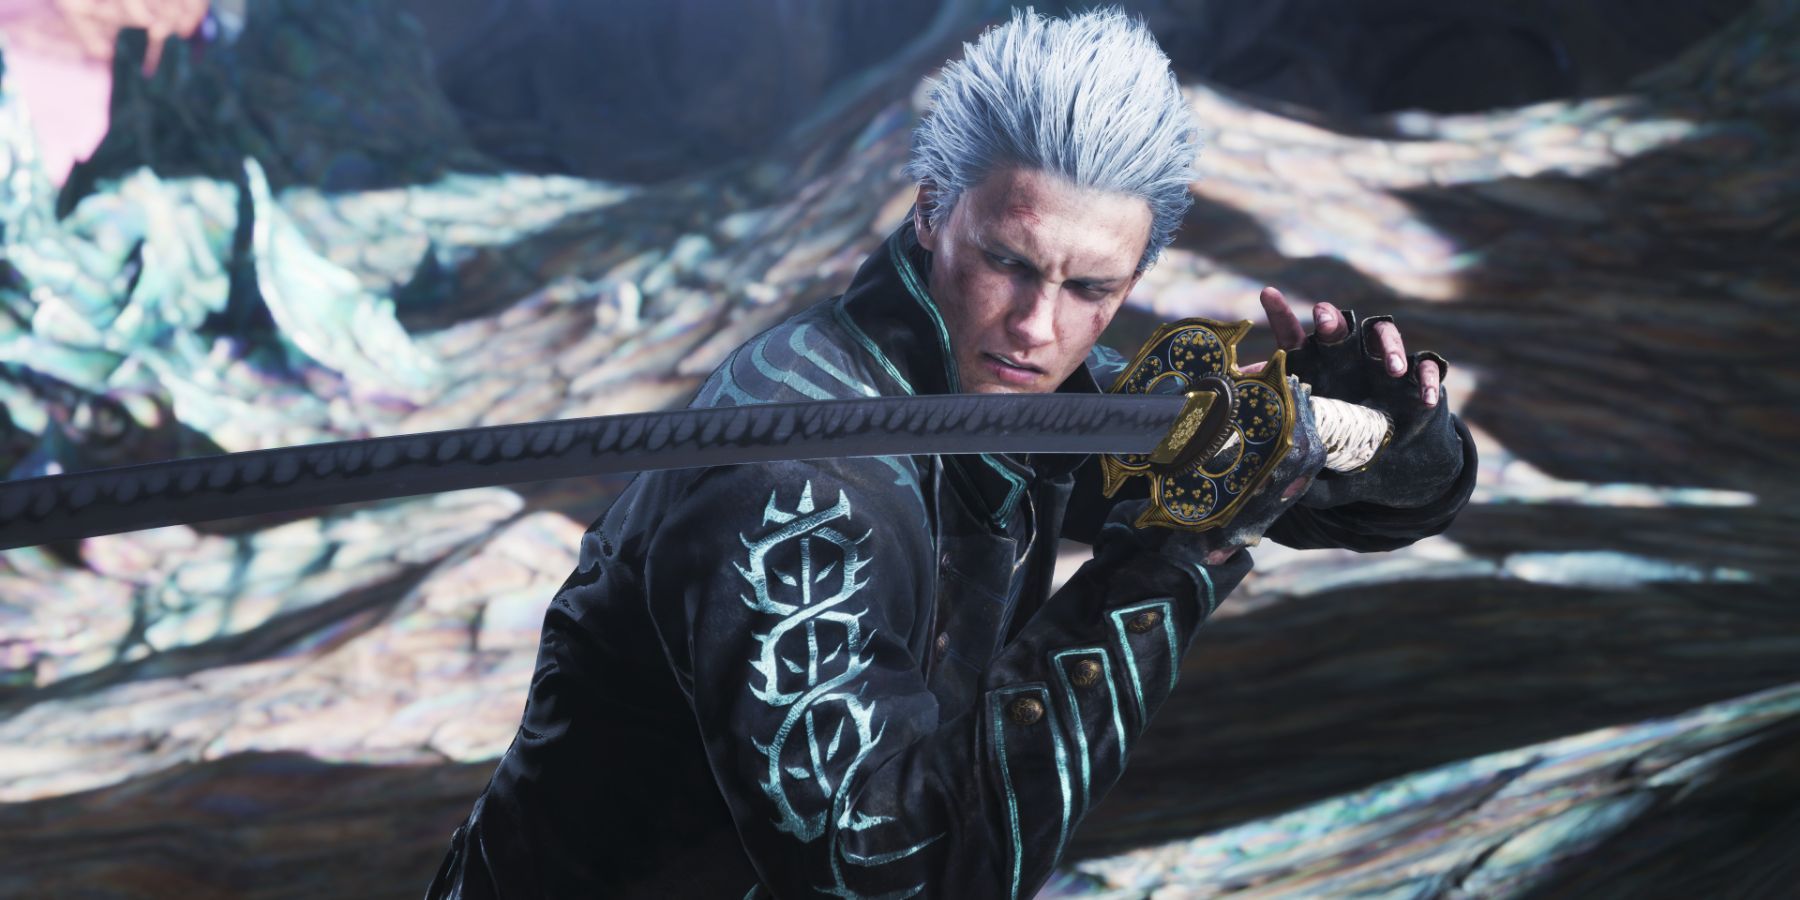 Vergil readying his stance against an enemy